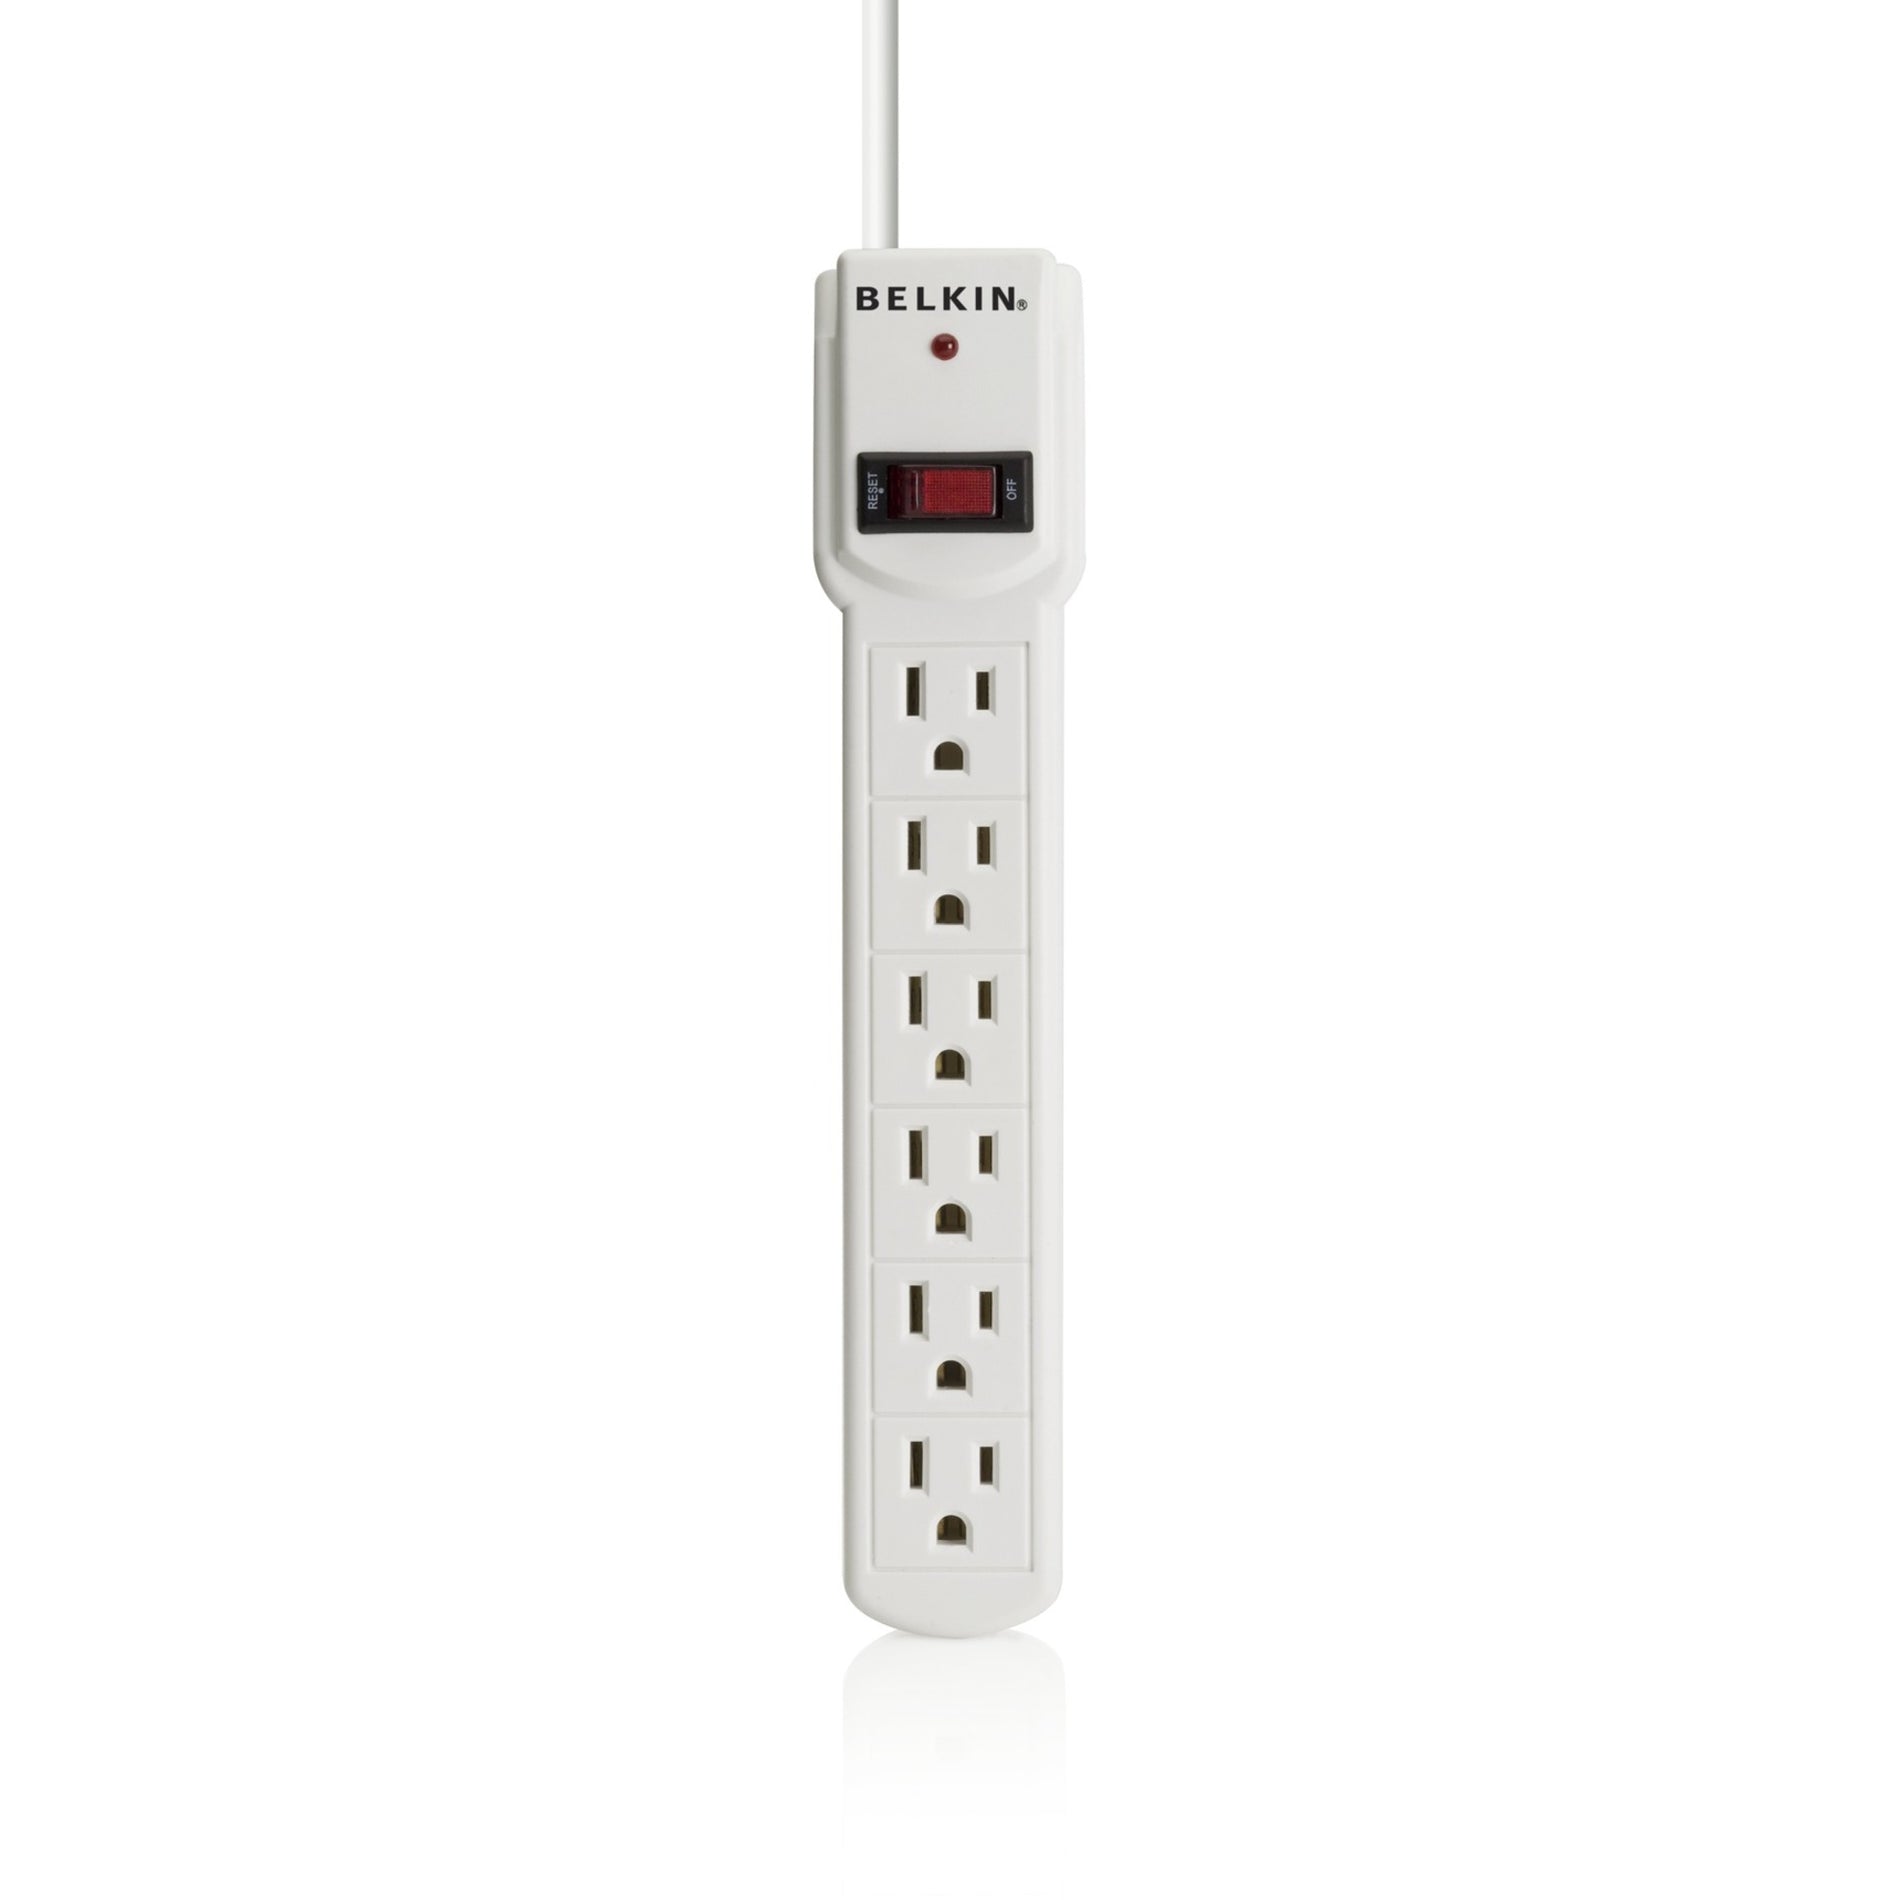 Belkin F5C047 6-Outlet Surge Protector with 3-foot Power Cord, 300 Joules Protection